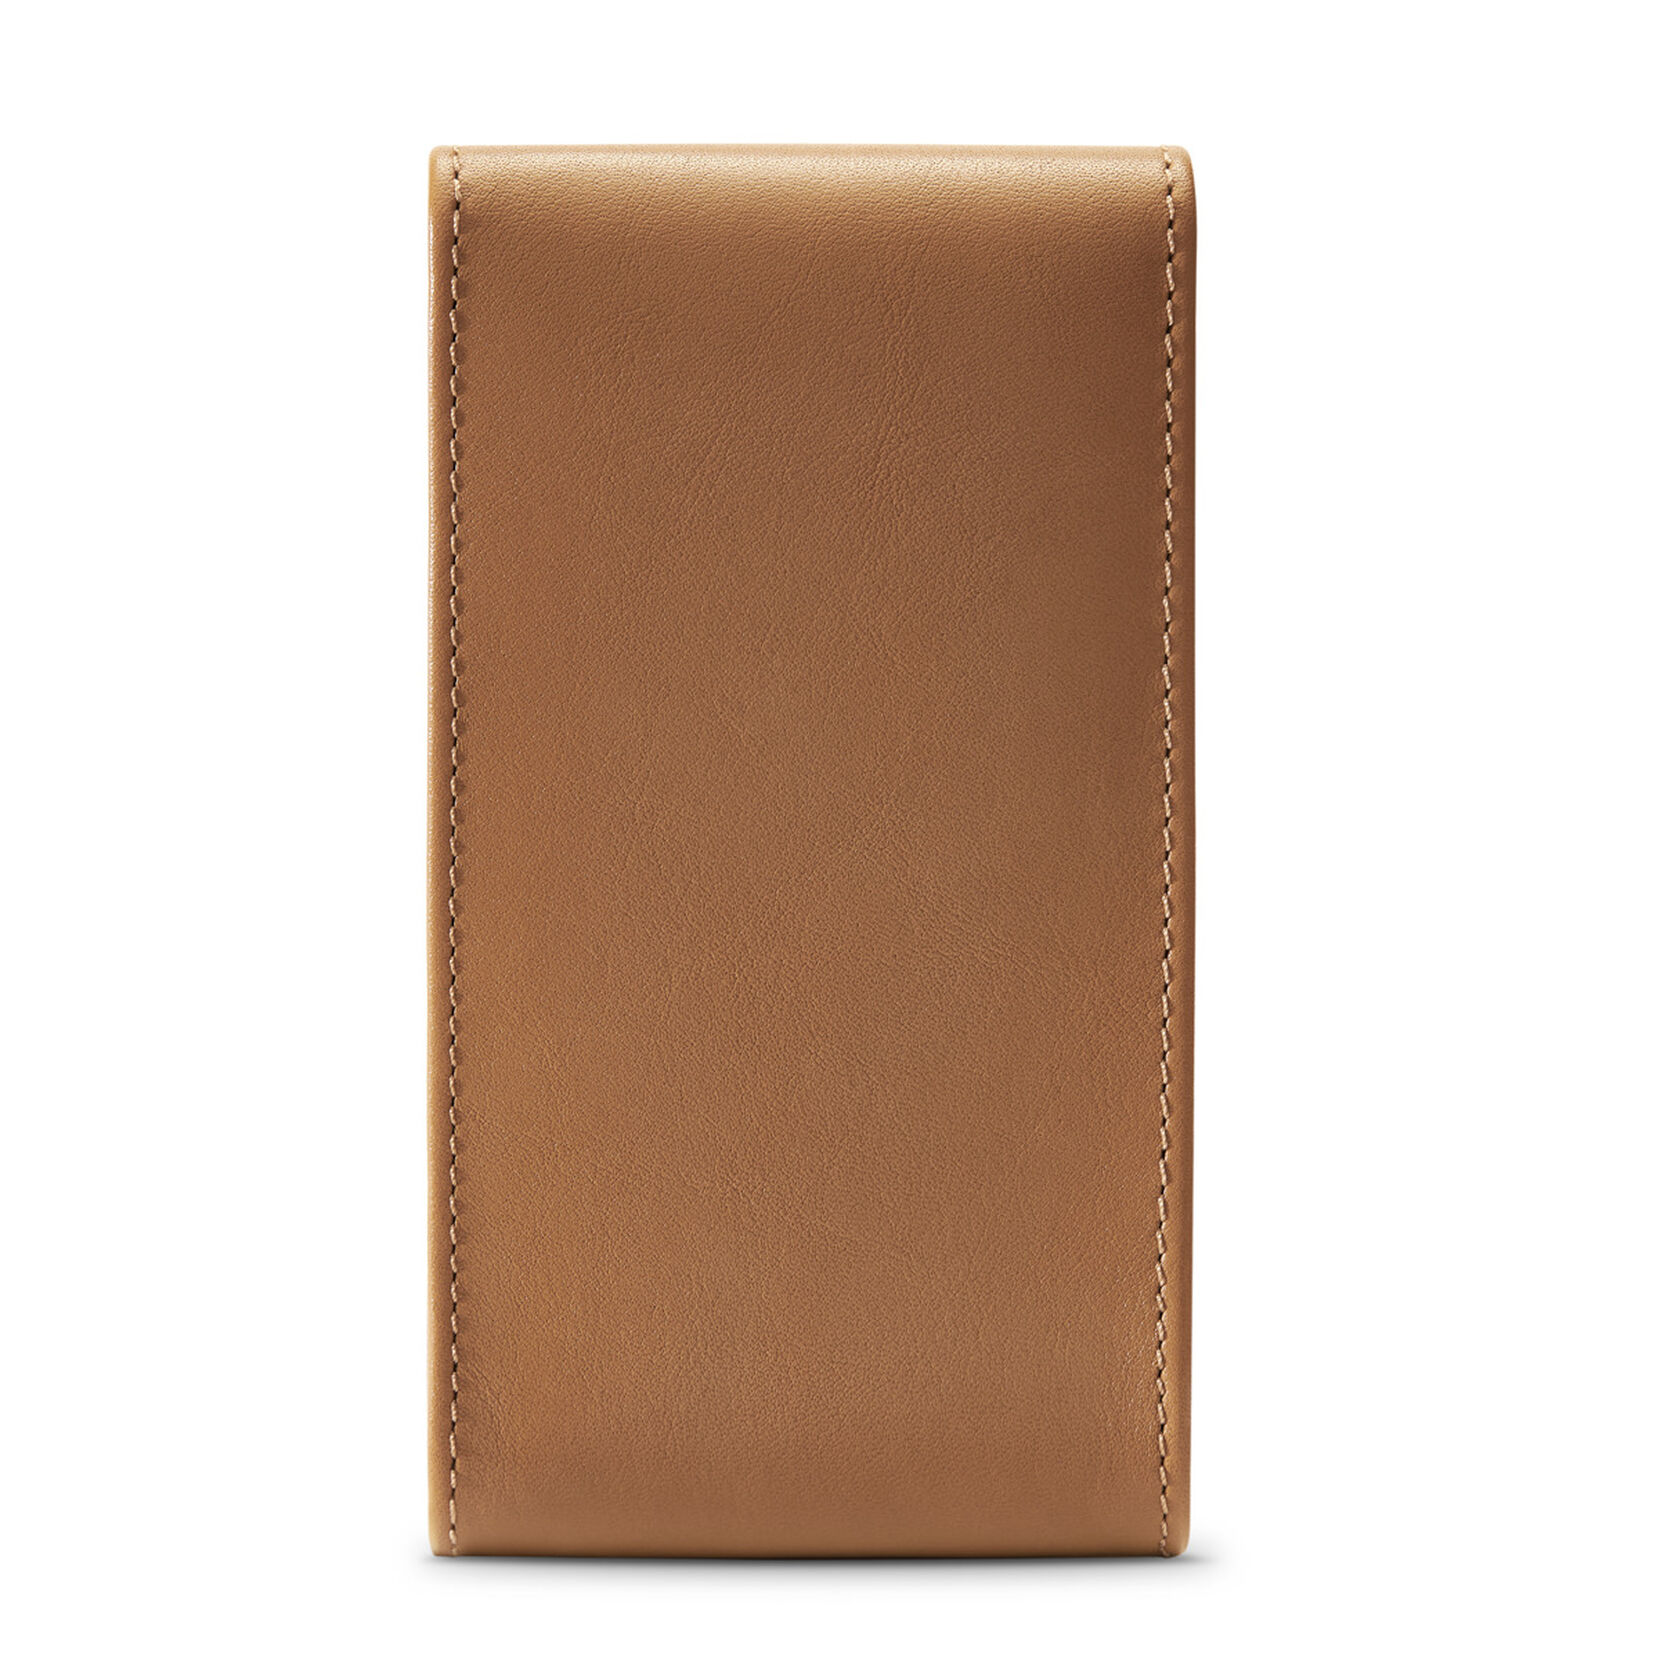 Signature Watch Pouch